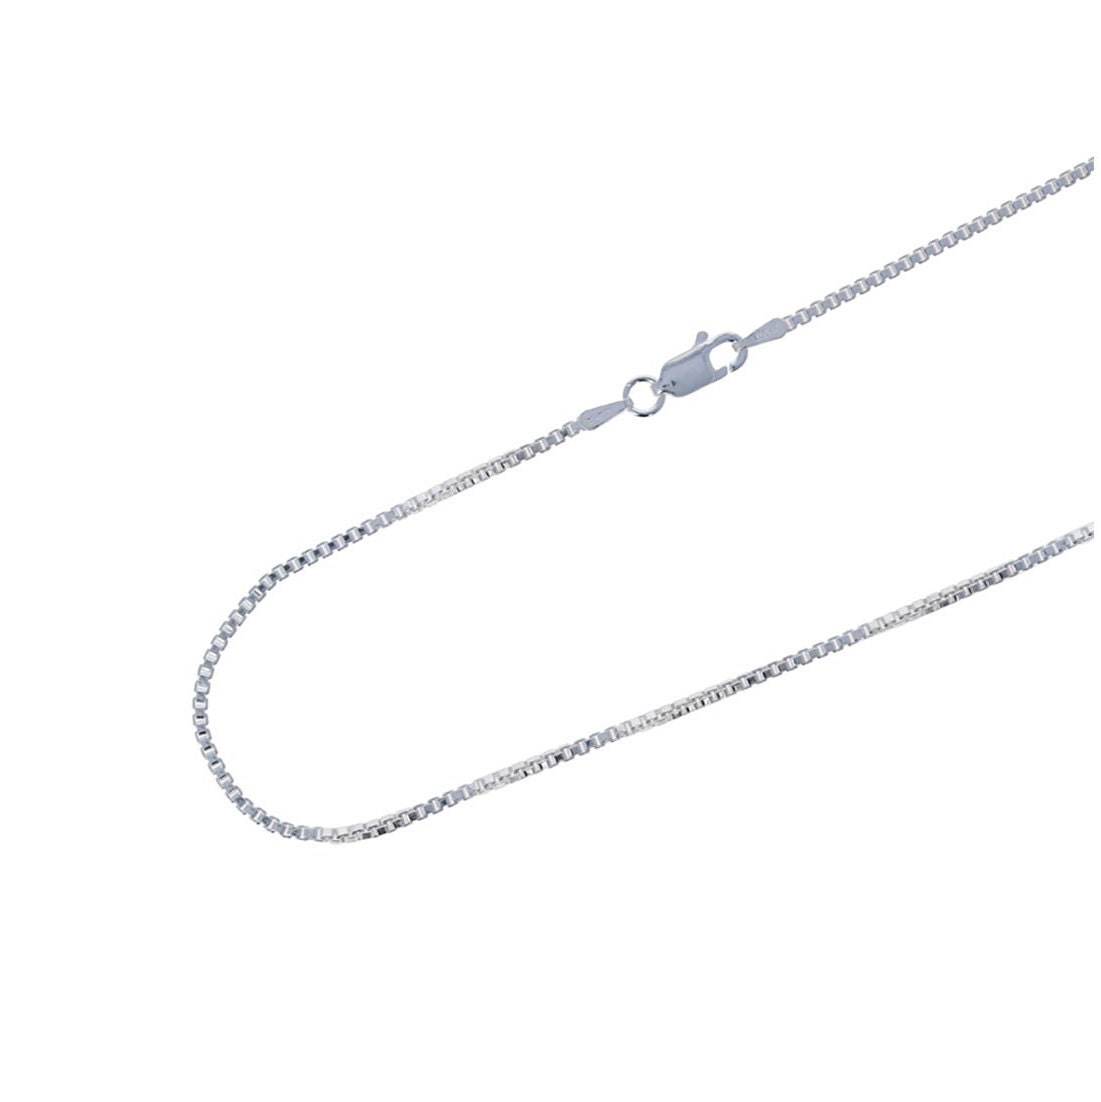 Solid 925 Sterling Silver 1.1mm Cable Chain Necklace